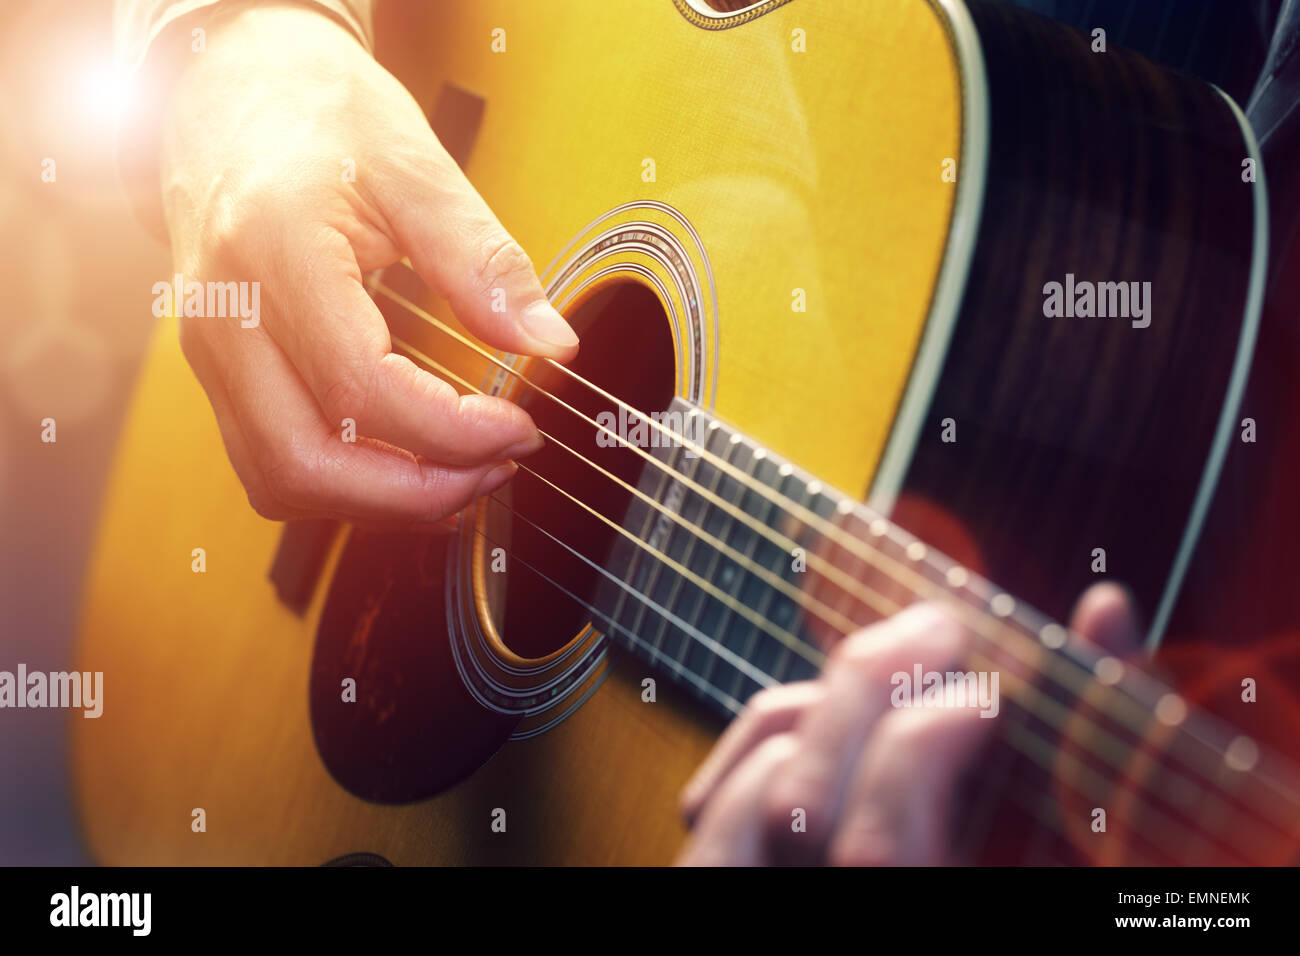 Man playing an acoustic guitar Stock Photo